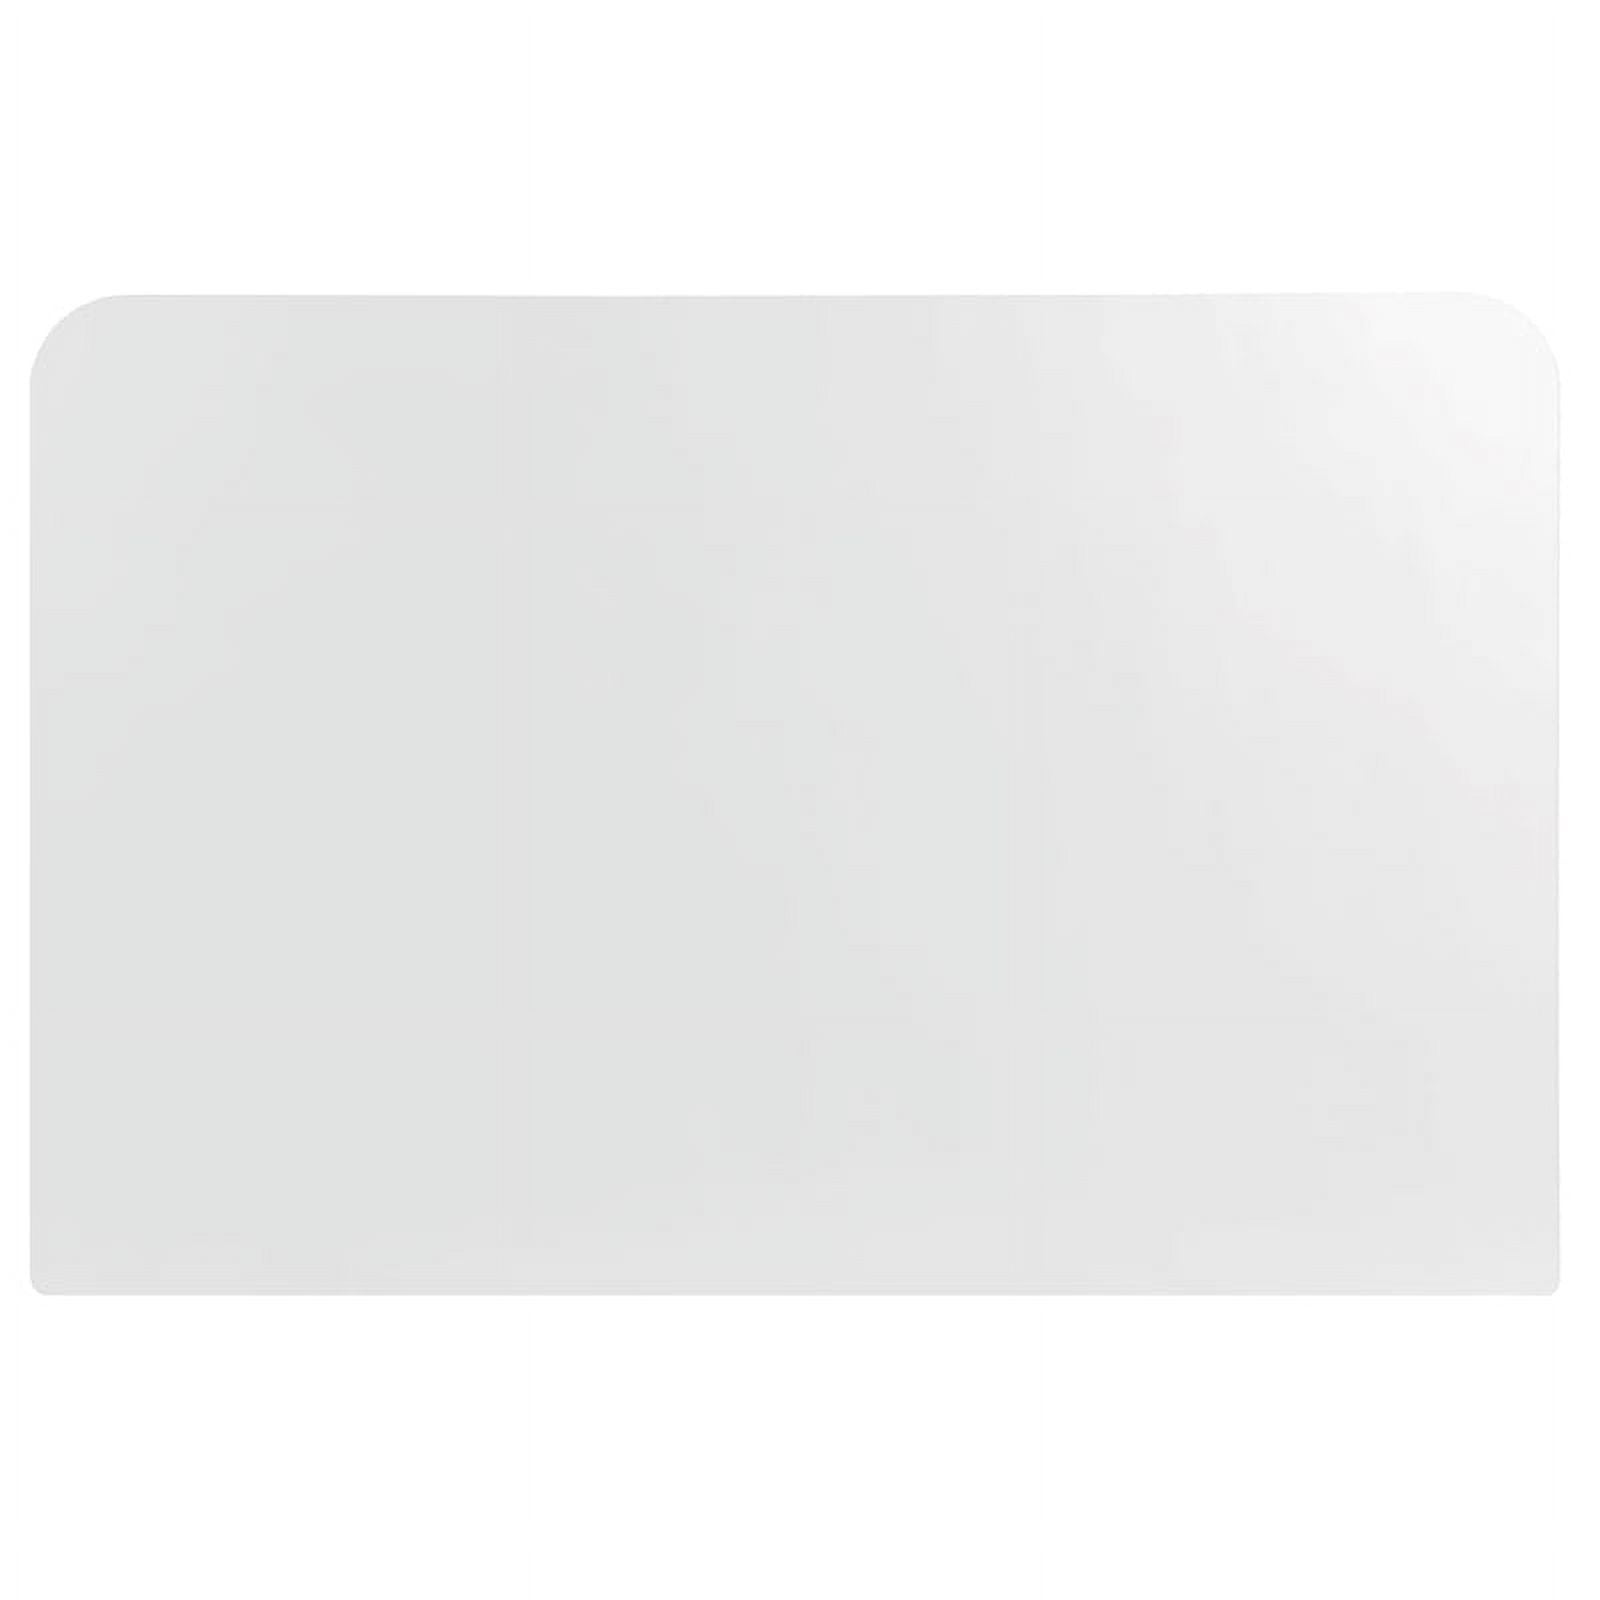 Picture of Boss NP05 36 x 24 x 0.24 in. Thick Plexiglass Panel